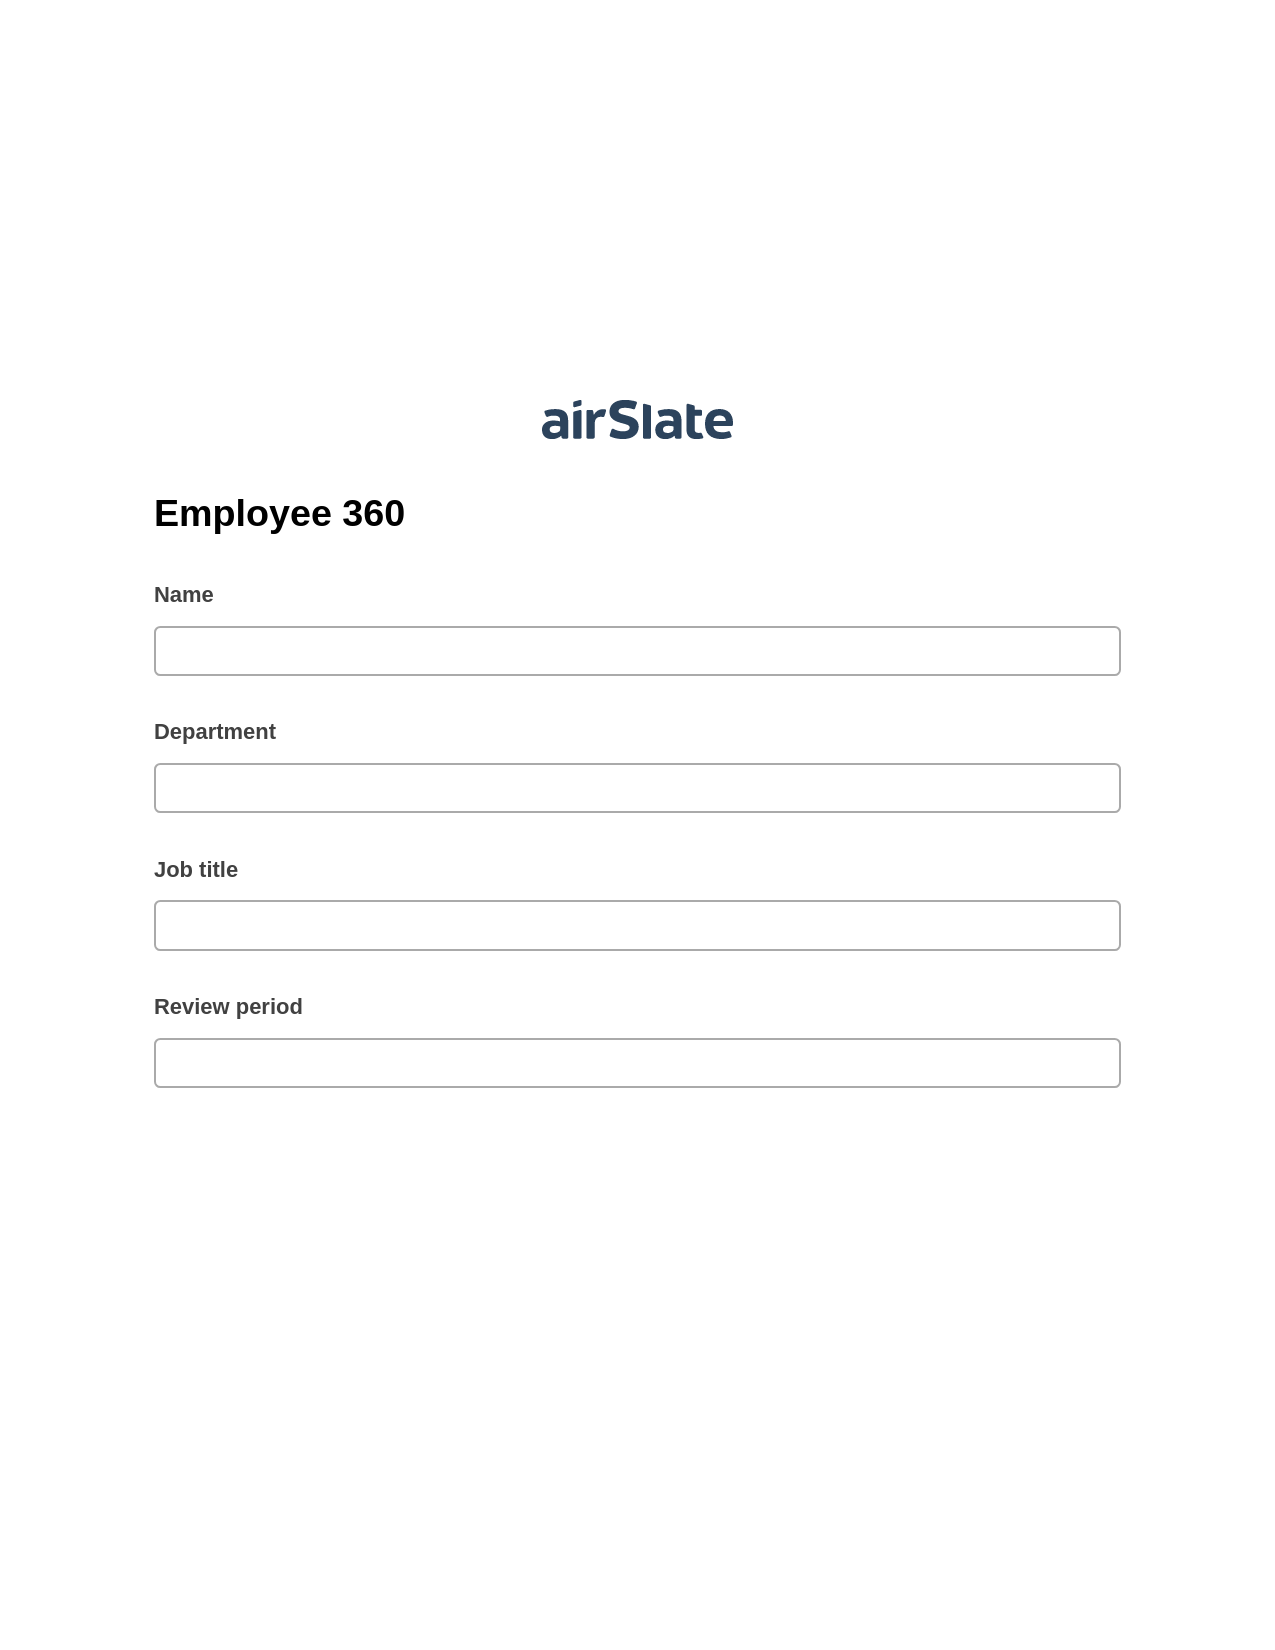 Employee 360 Pre-fill Dropdowns from Airtable, Update MS Dynamics 365 Record Bot, Post-finish Document Bot